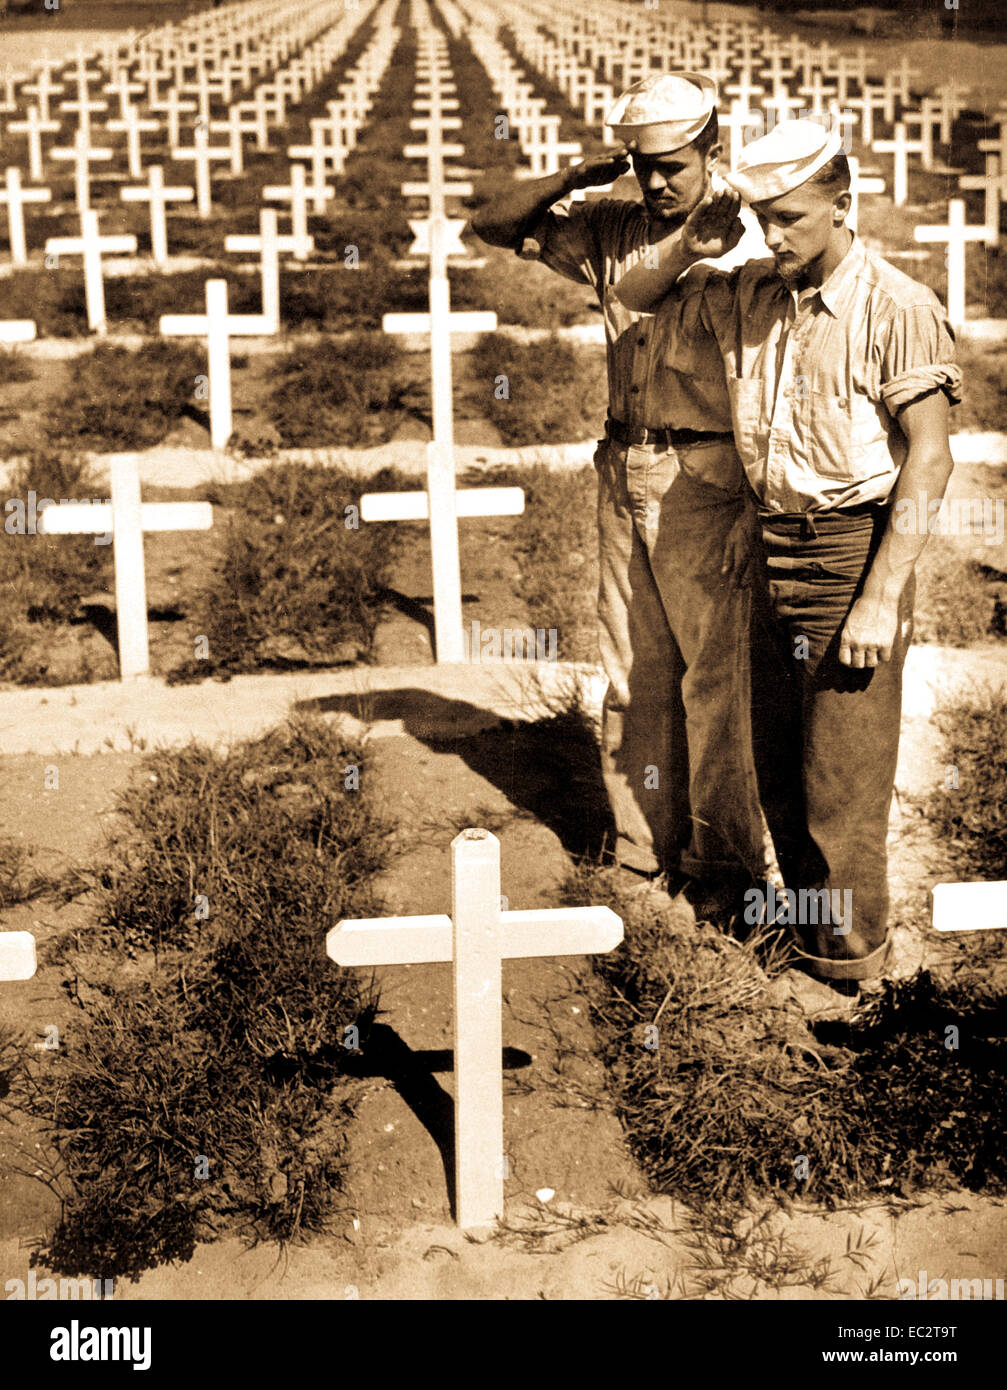 Standing in the grassy sod bordering row upon row of white crosses in an American cemetery, two dungaree-clad Coast Guardsmen pay silent homage to the memory of a fellow Coast Guardsman who lost his life in action in the Ryukyu Islands.  Ca. 1945. Benrud. (Coast Guard) Stock Photo